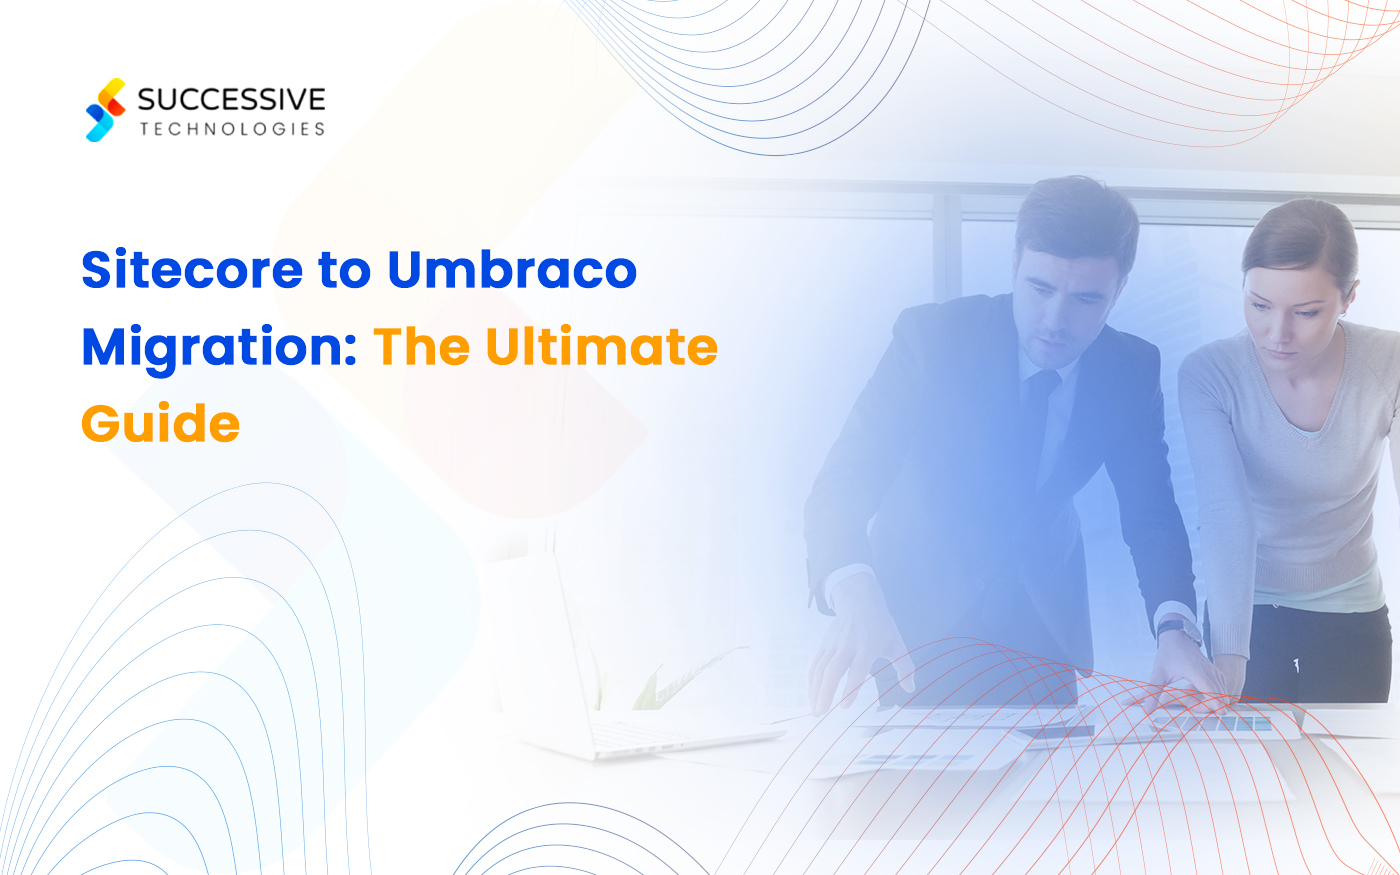 Sitecore to Umbraco Migration: The Ultimate Guide